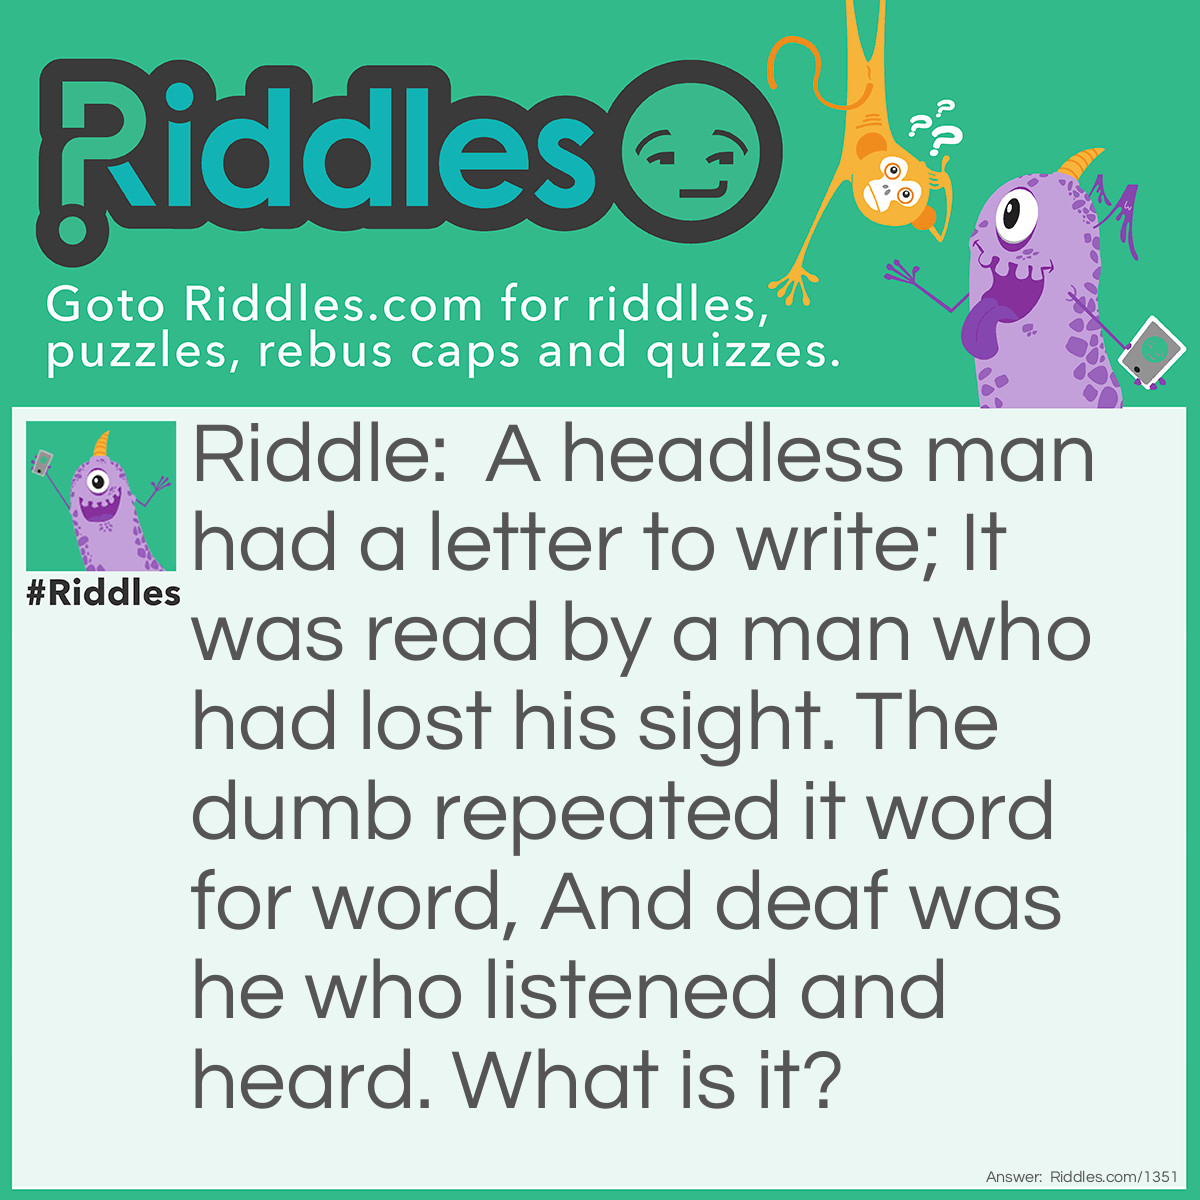 Riddle: A headless man had a letter to write; It was read by a man who had lost his sight. The dumb repeated it word for word, And deaf was he who listened and heard. What is it? Answer: The letter in question is the letter "O". It is zero. The man had nothing to write. The blind could read nothing. The person who was dumb could repeat nothing. The deaf man listened and heard nothing.